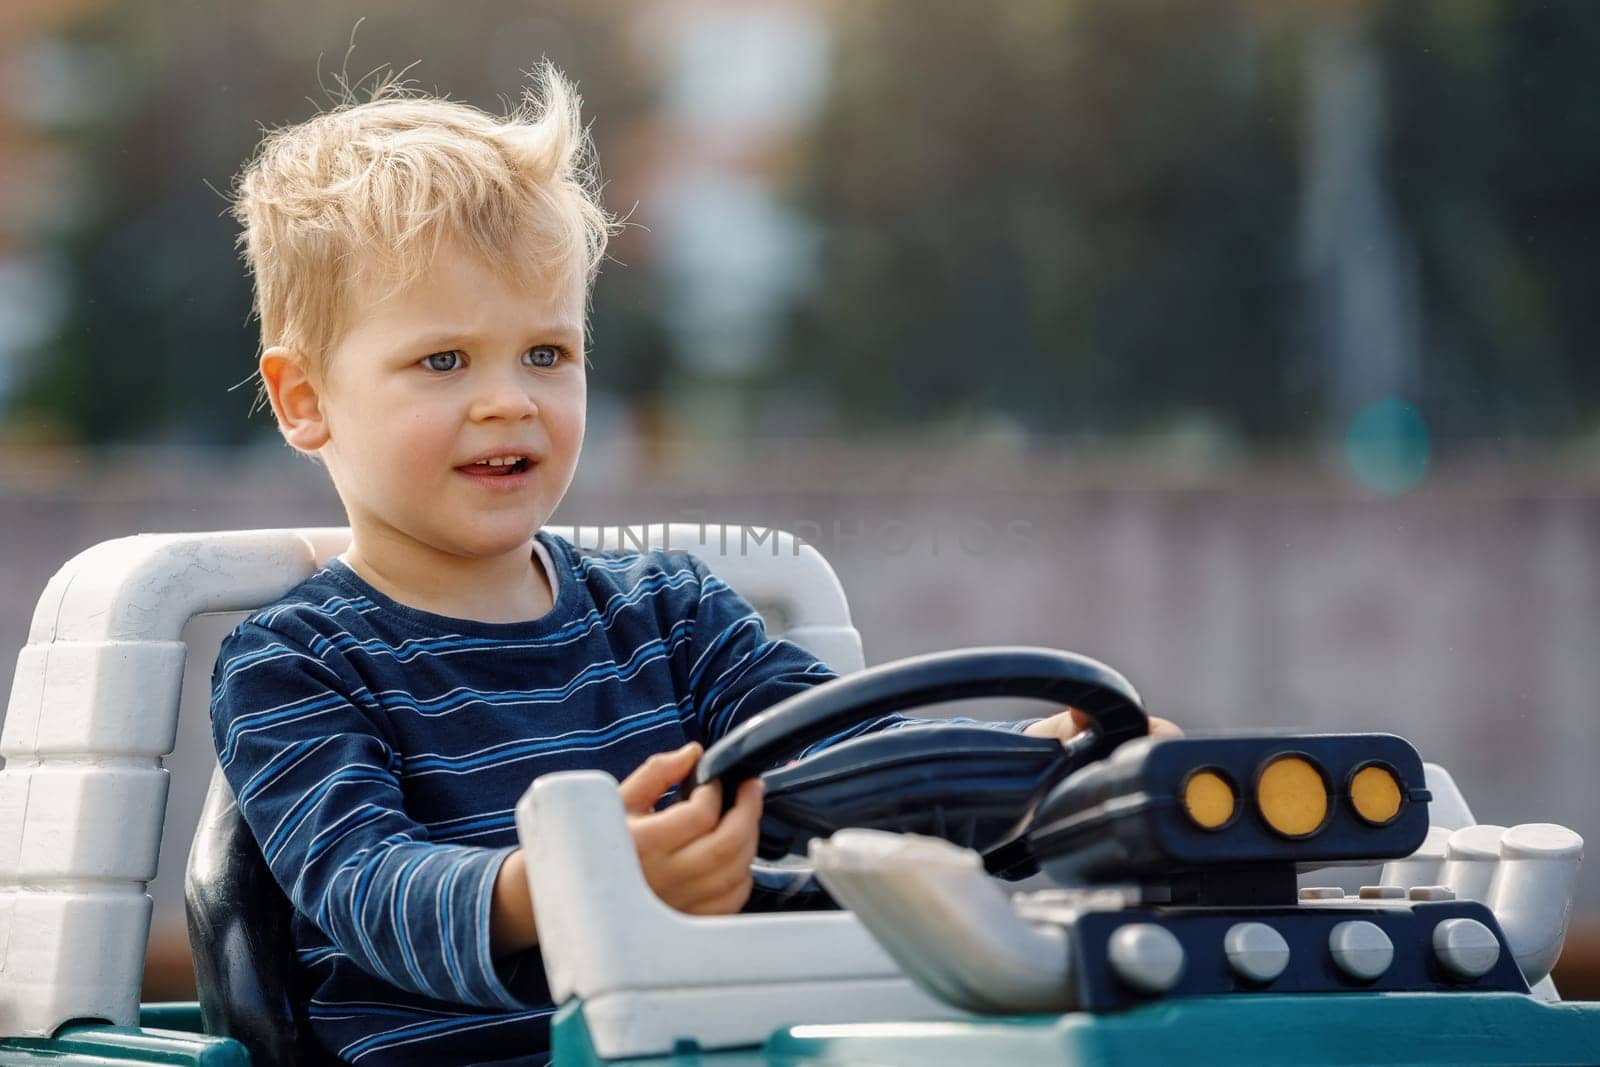 Little boy driving big toy car with steering wheel and having fun outdoors. Young kid portrait with toy car.